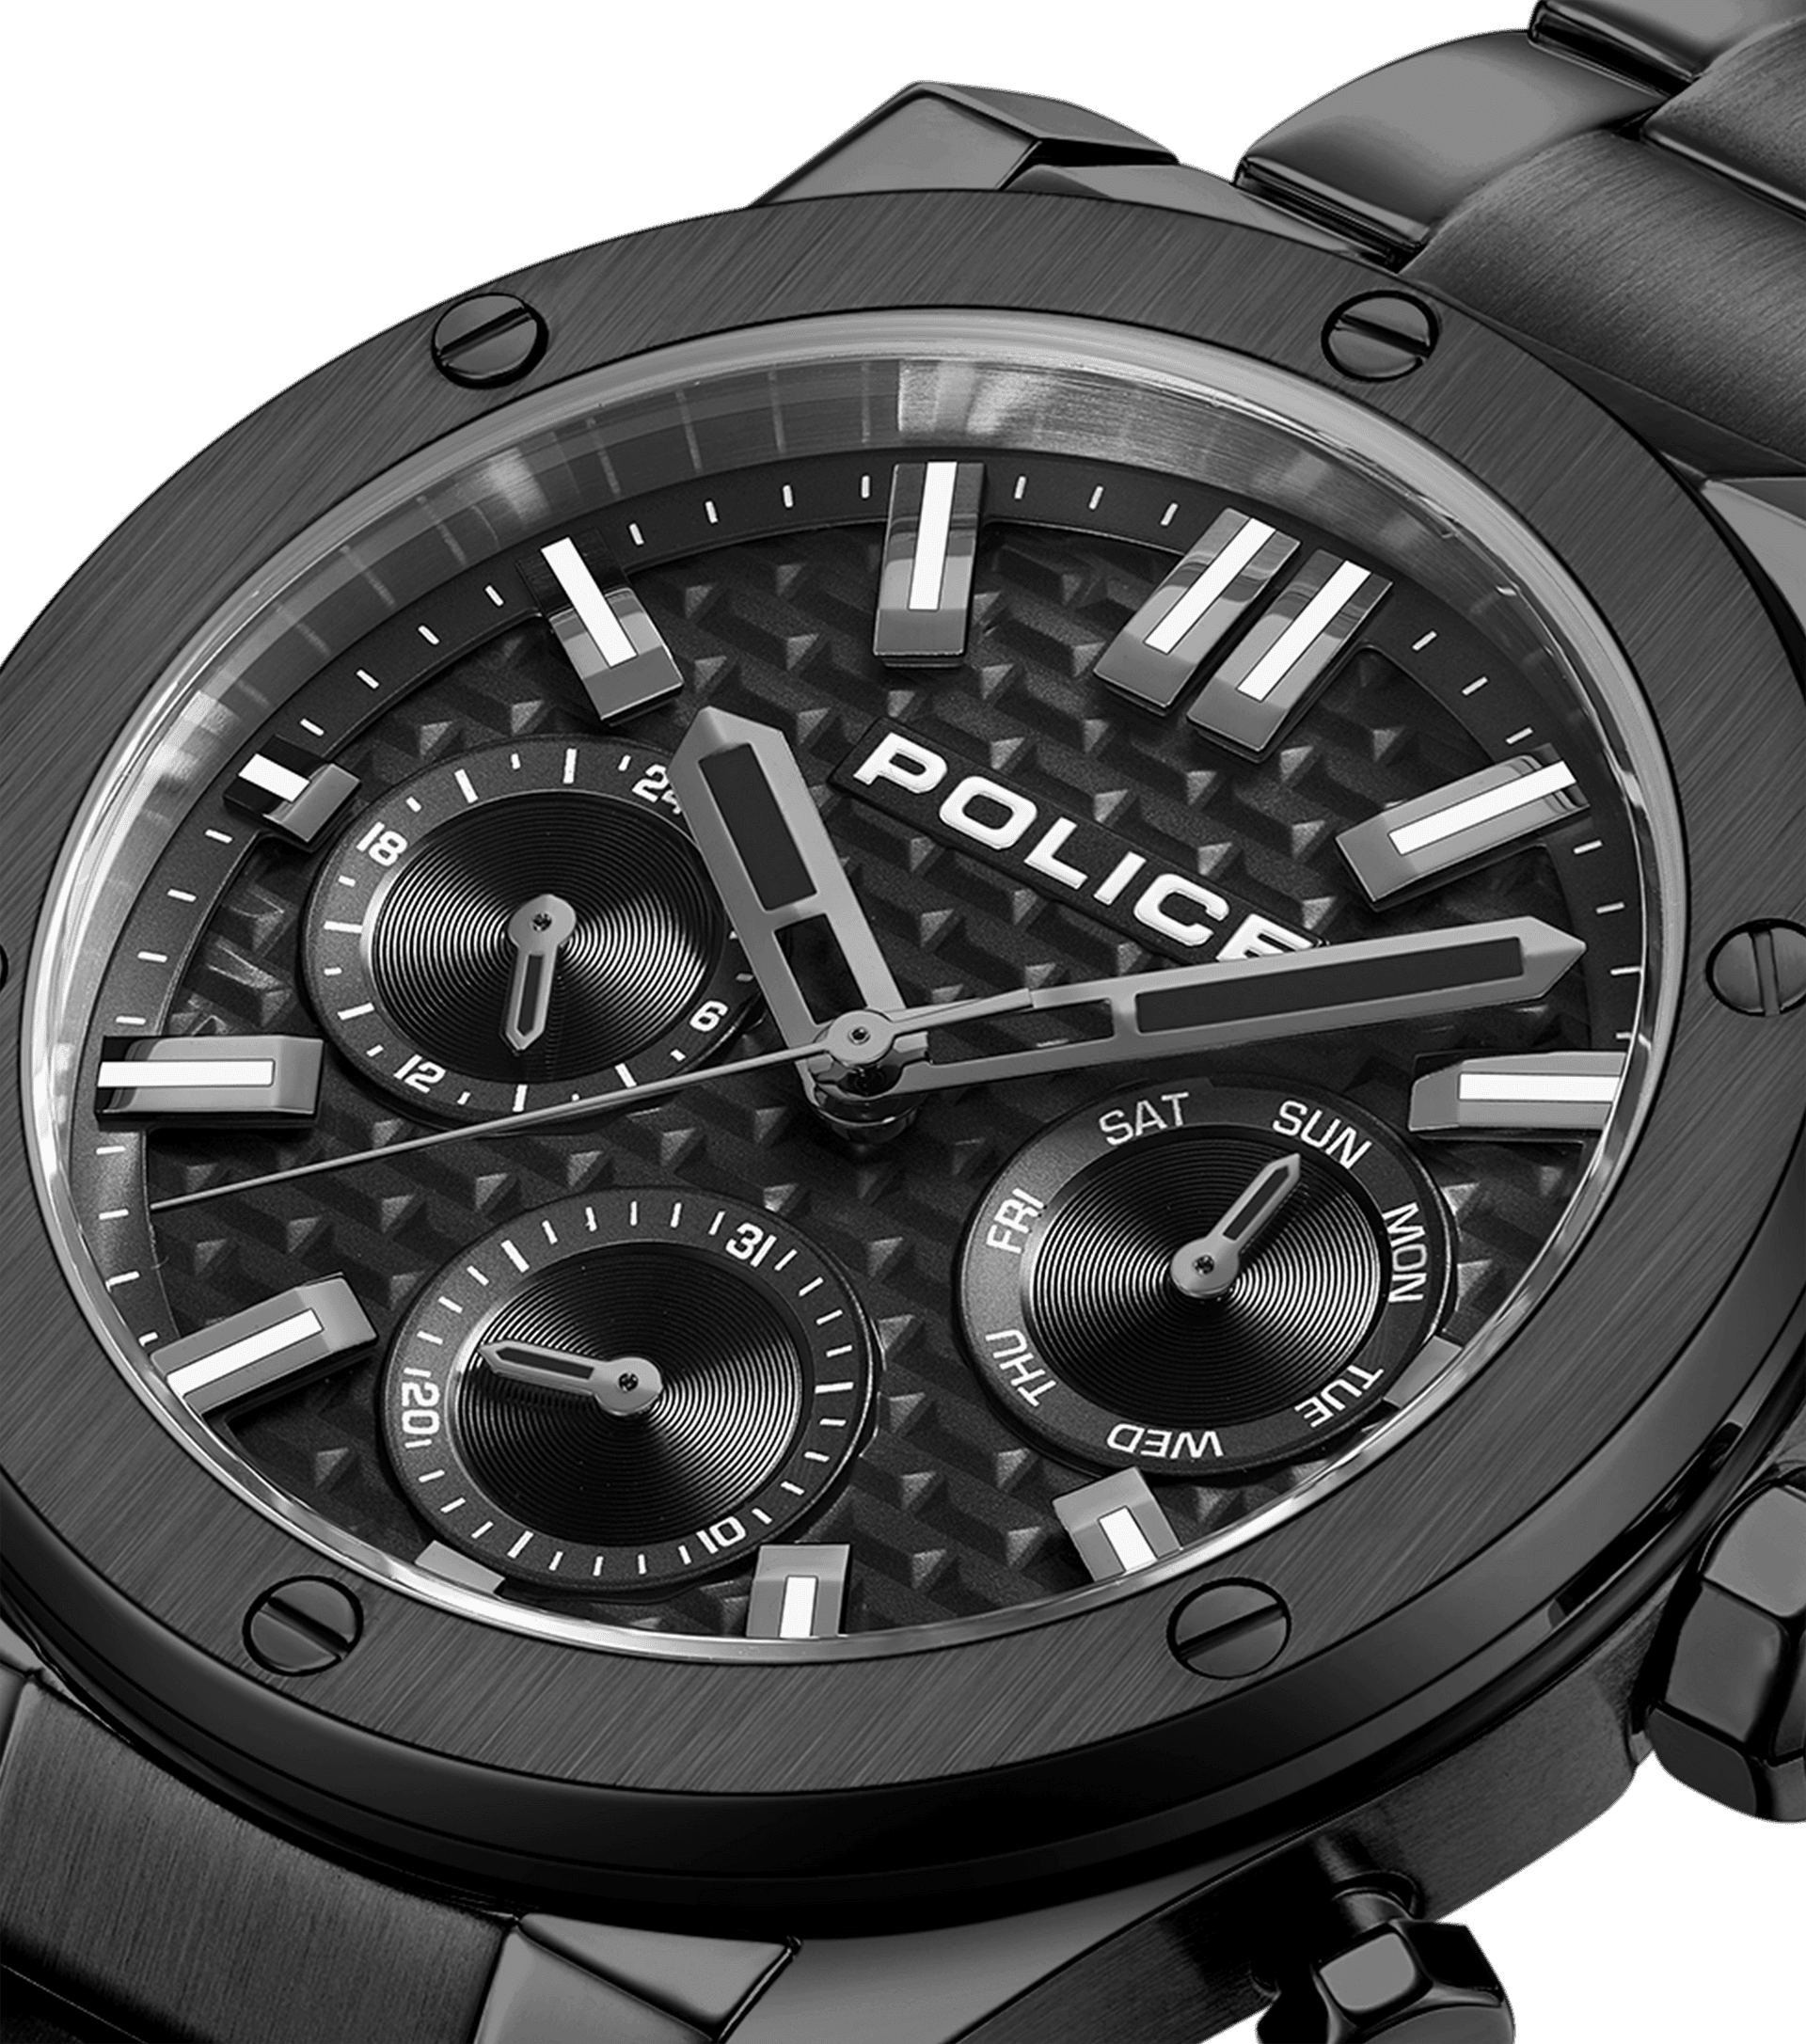 Police watches - Underlined Black, Gold For Police Men Watch